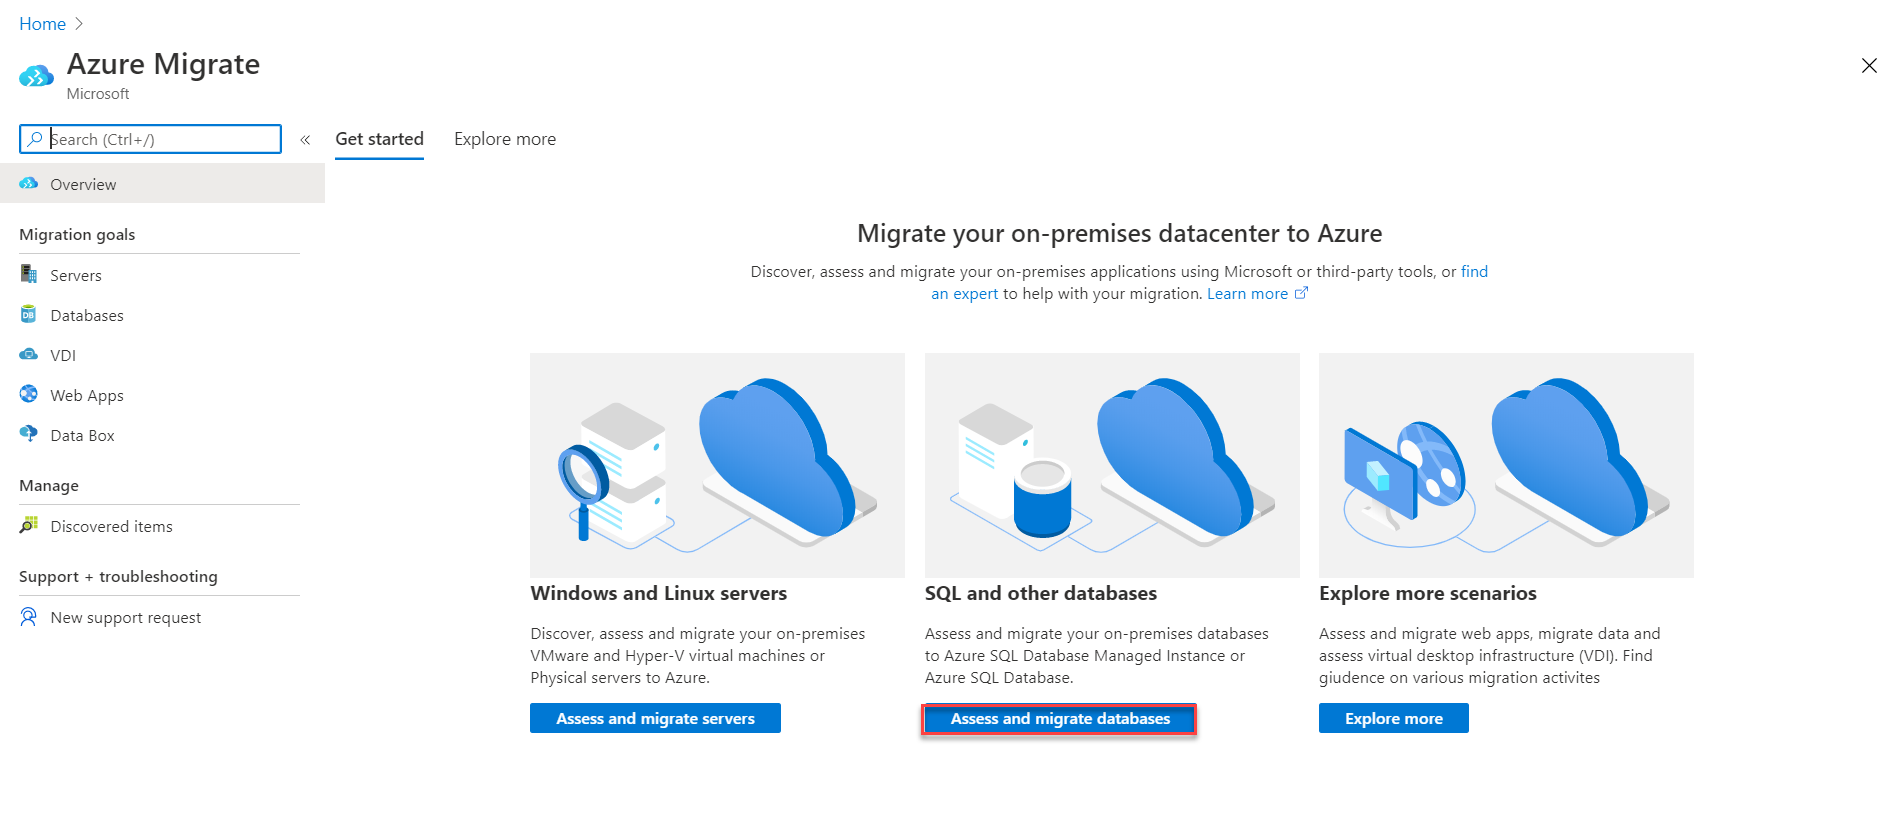 Migrating SQL workloads to Microsoft Azure: Assessment and Migration Tools